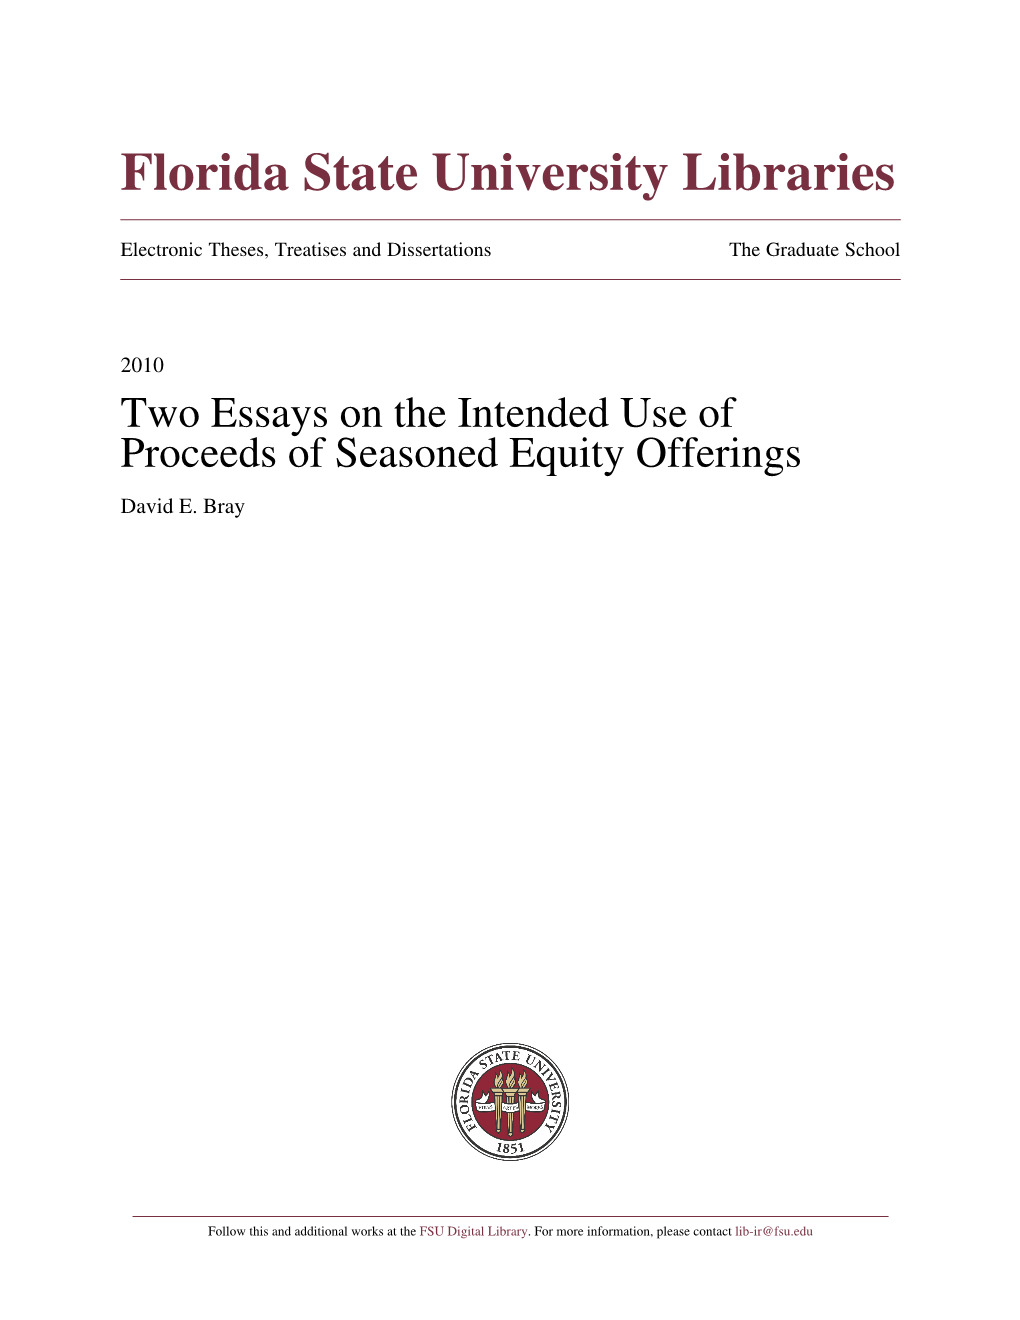 Two Essays on the Intended Use of Proceeds of Seasoned Equity Offerings David E